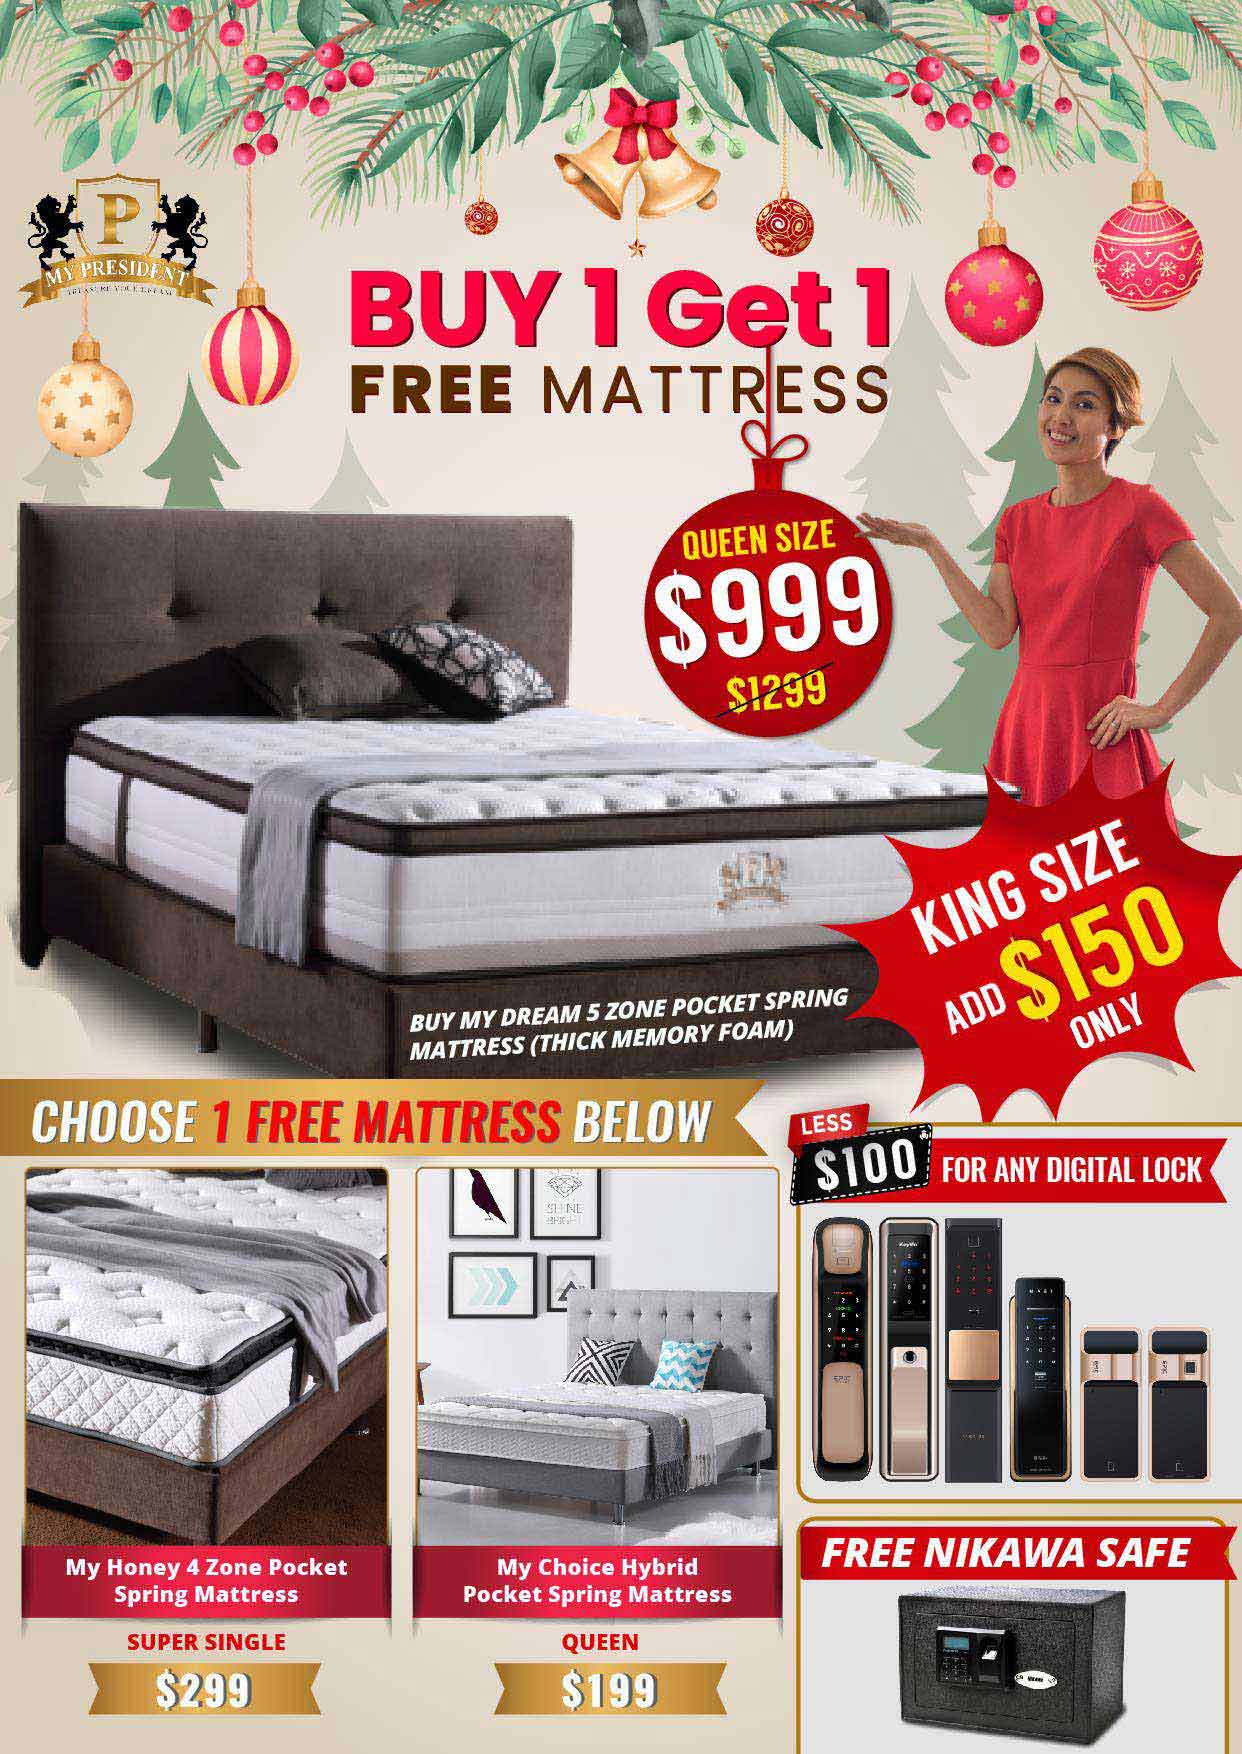 Flyer Design for Mattress Christmas Promotions